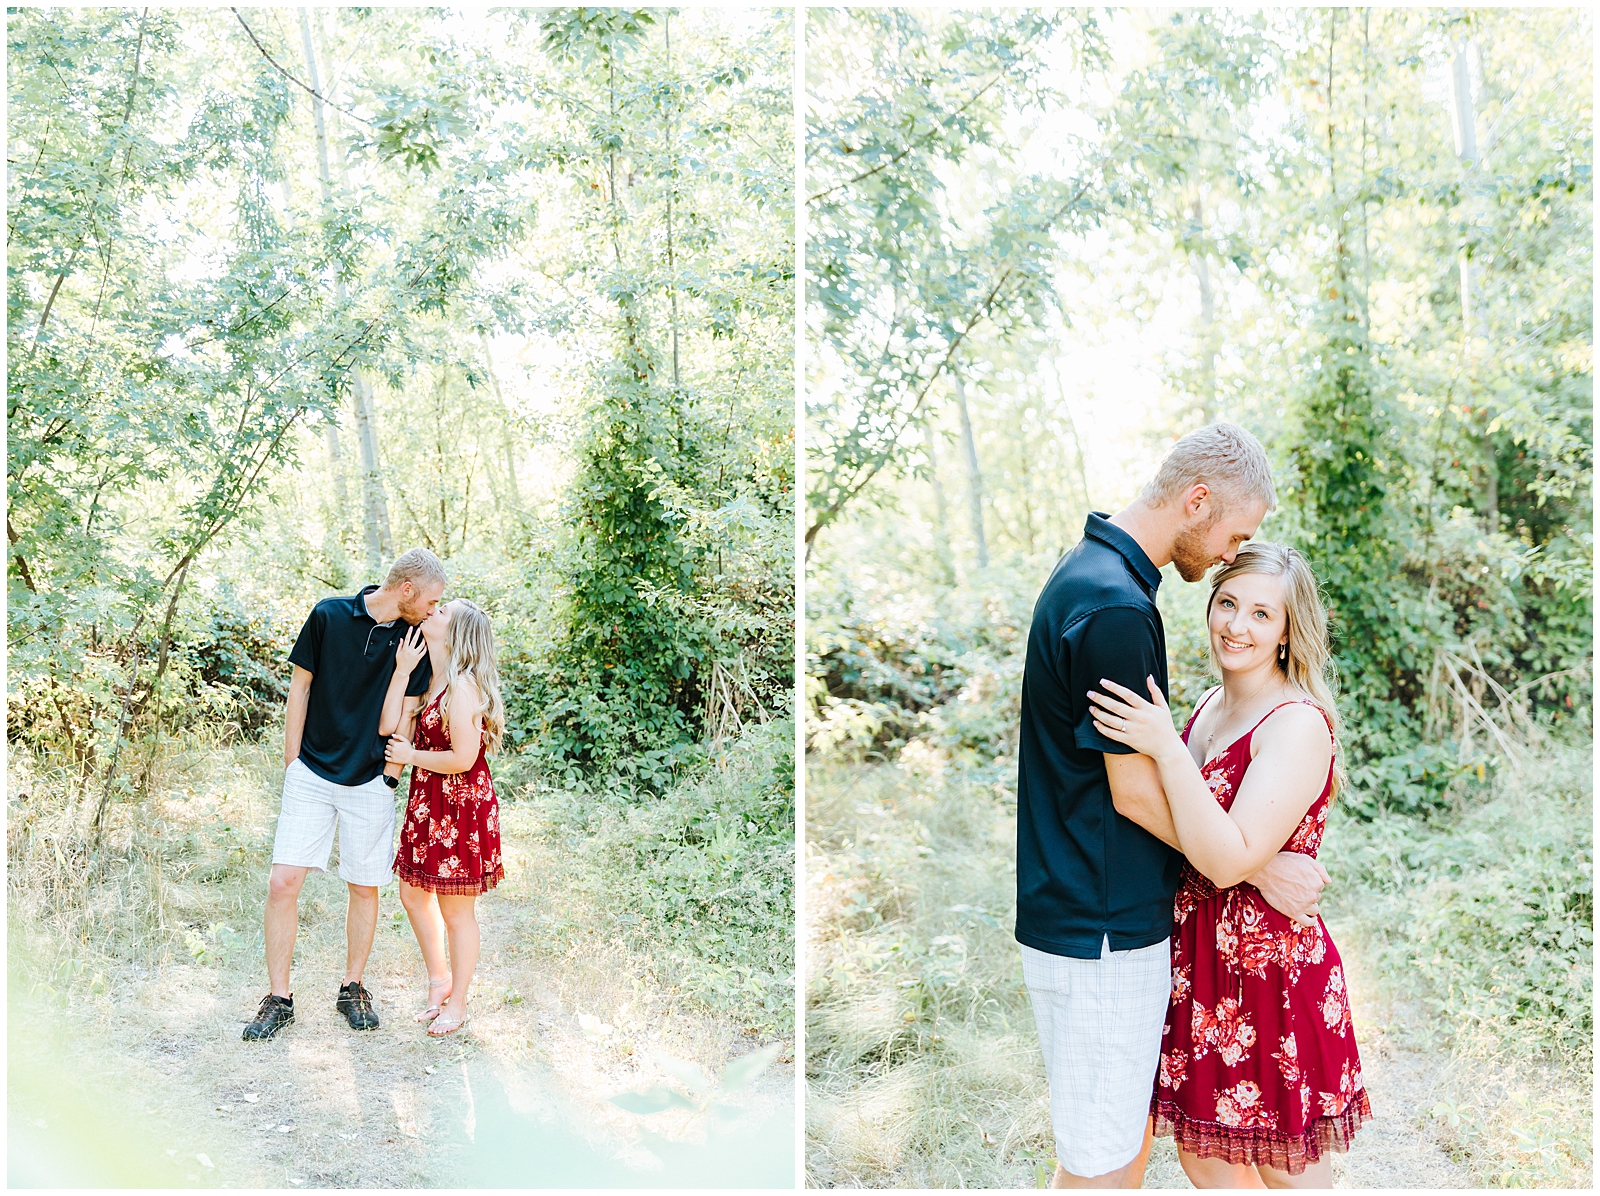 Summer Engagement Session by the Boise River